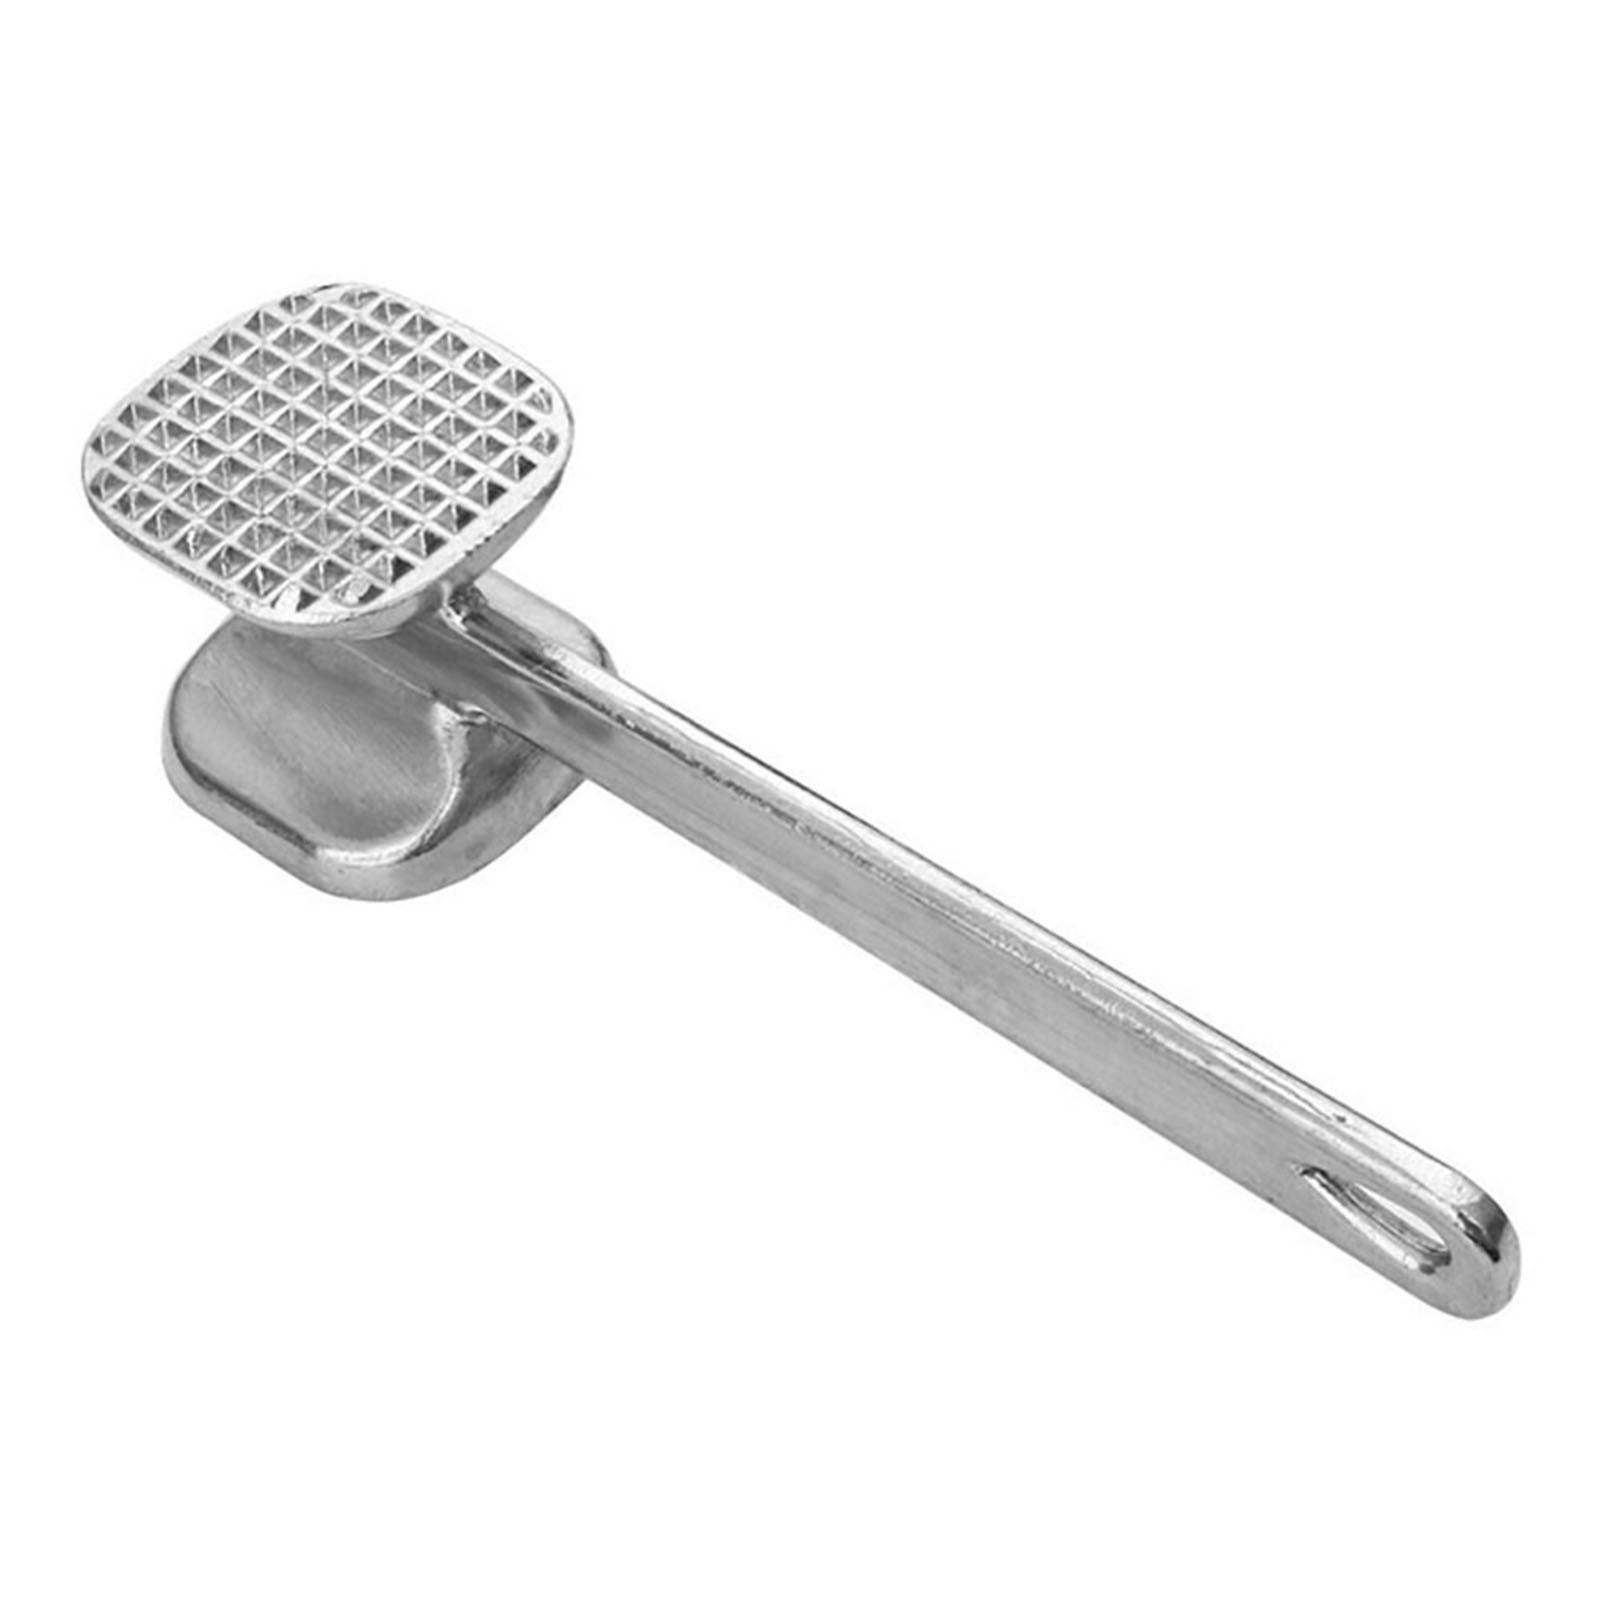 Meat Tenderizer Mallet Small Travel Food Hammer Mallet Tool Beef Pork Chic Tool